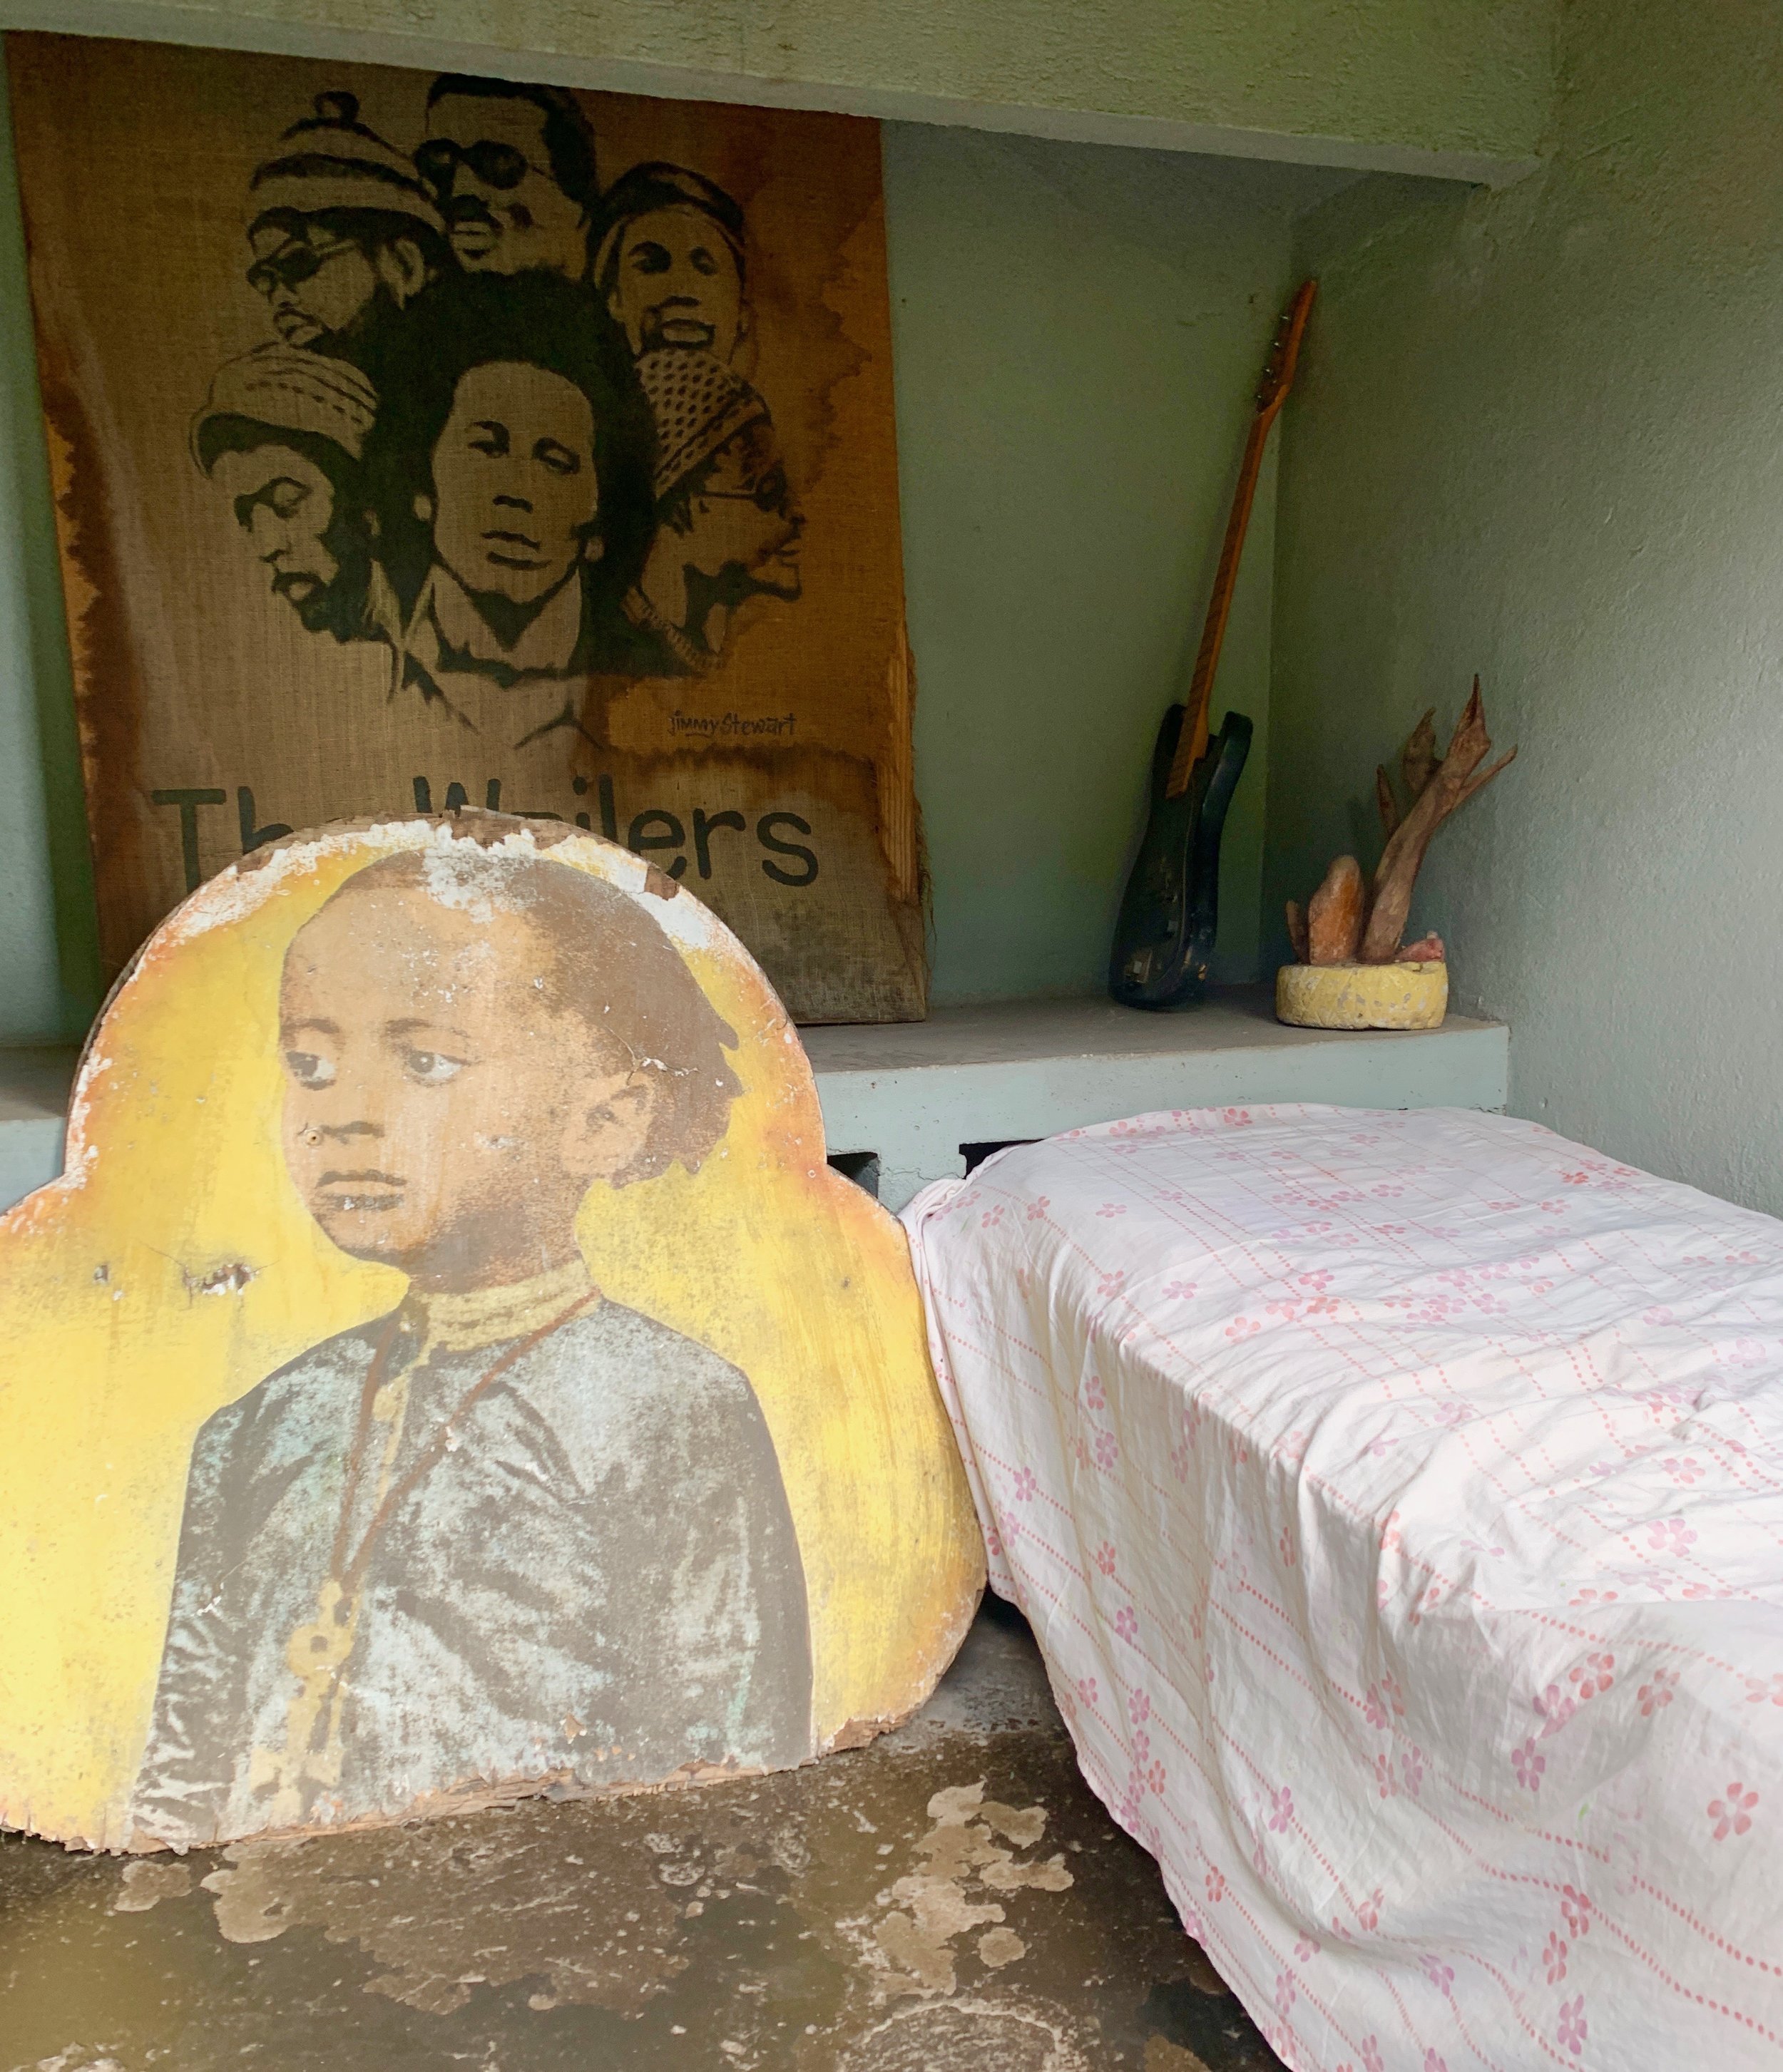  Remember how Bob Marley sings “Cold ground was my bed last night” in Talkin’ Blues? This was his room in the yard at Trench Yown, with the twin bed where his wife, Rita, and their child slept  – and the “cold ground” that doubled as his bed. 